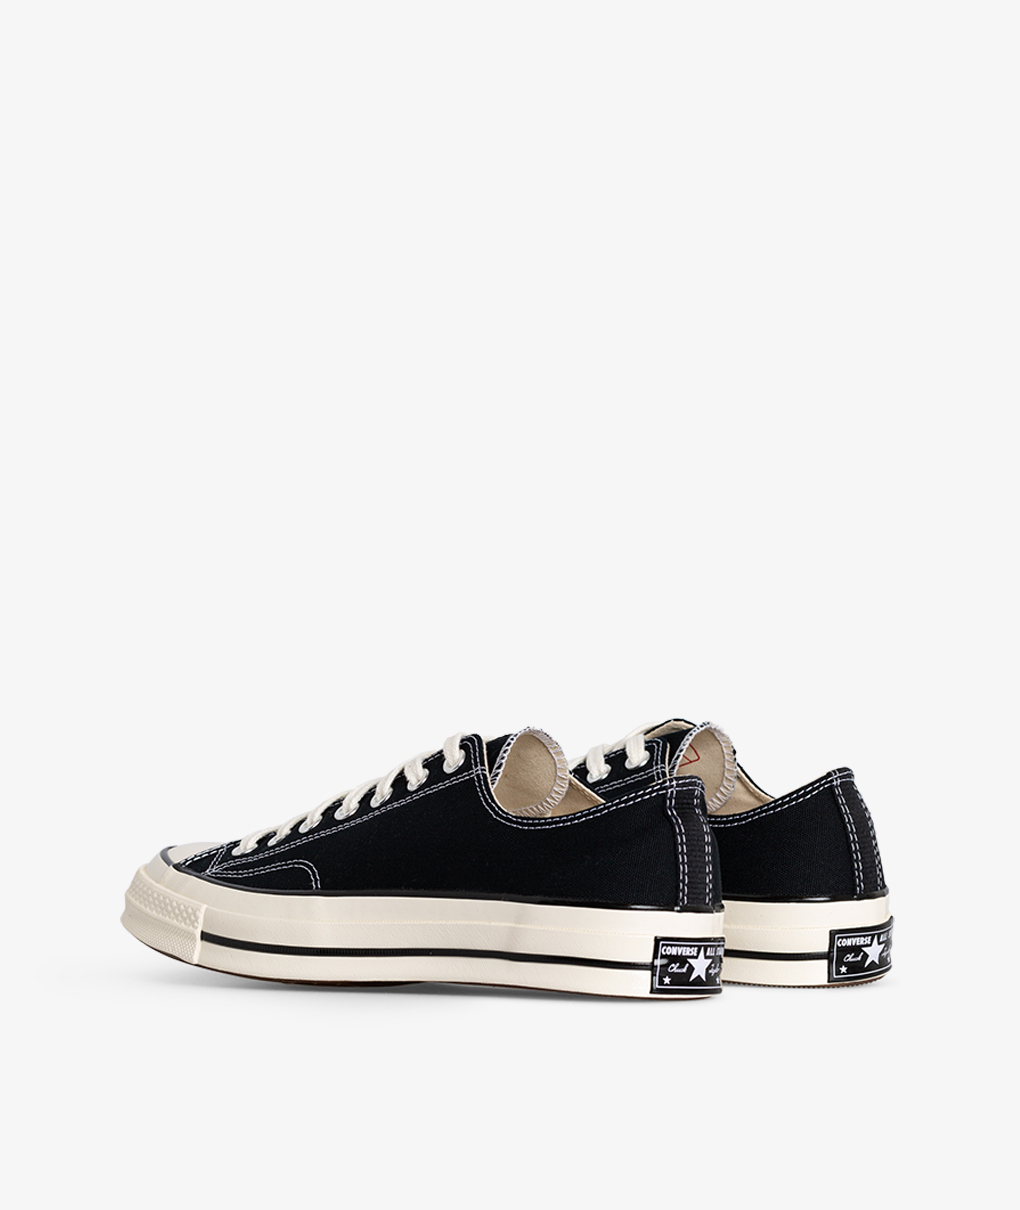 Norse Store | Shipping Worldwide - Sneakers - - Chuck 70 OX